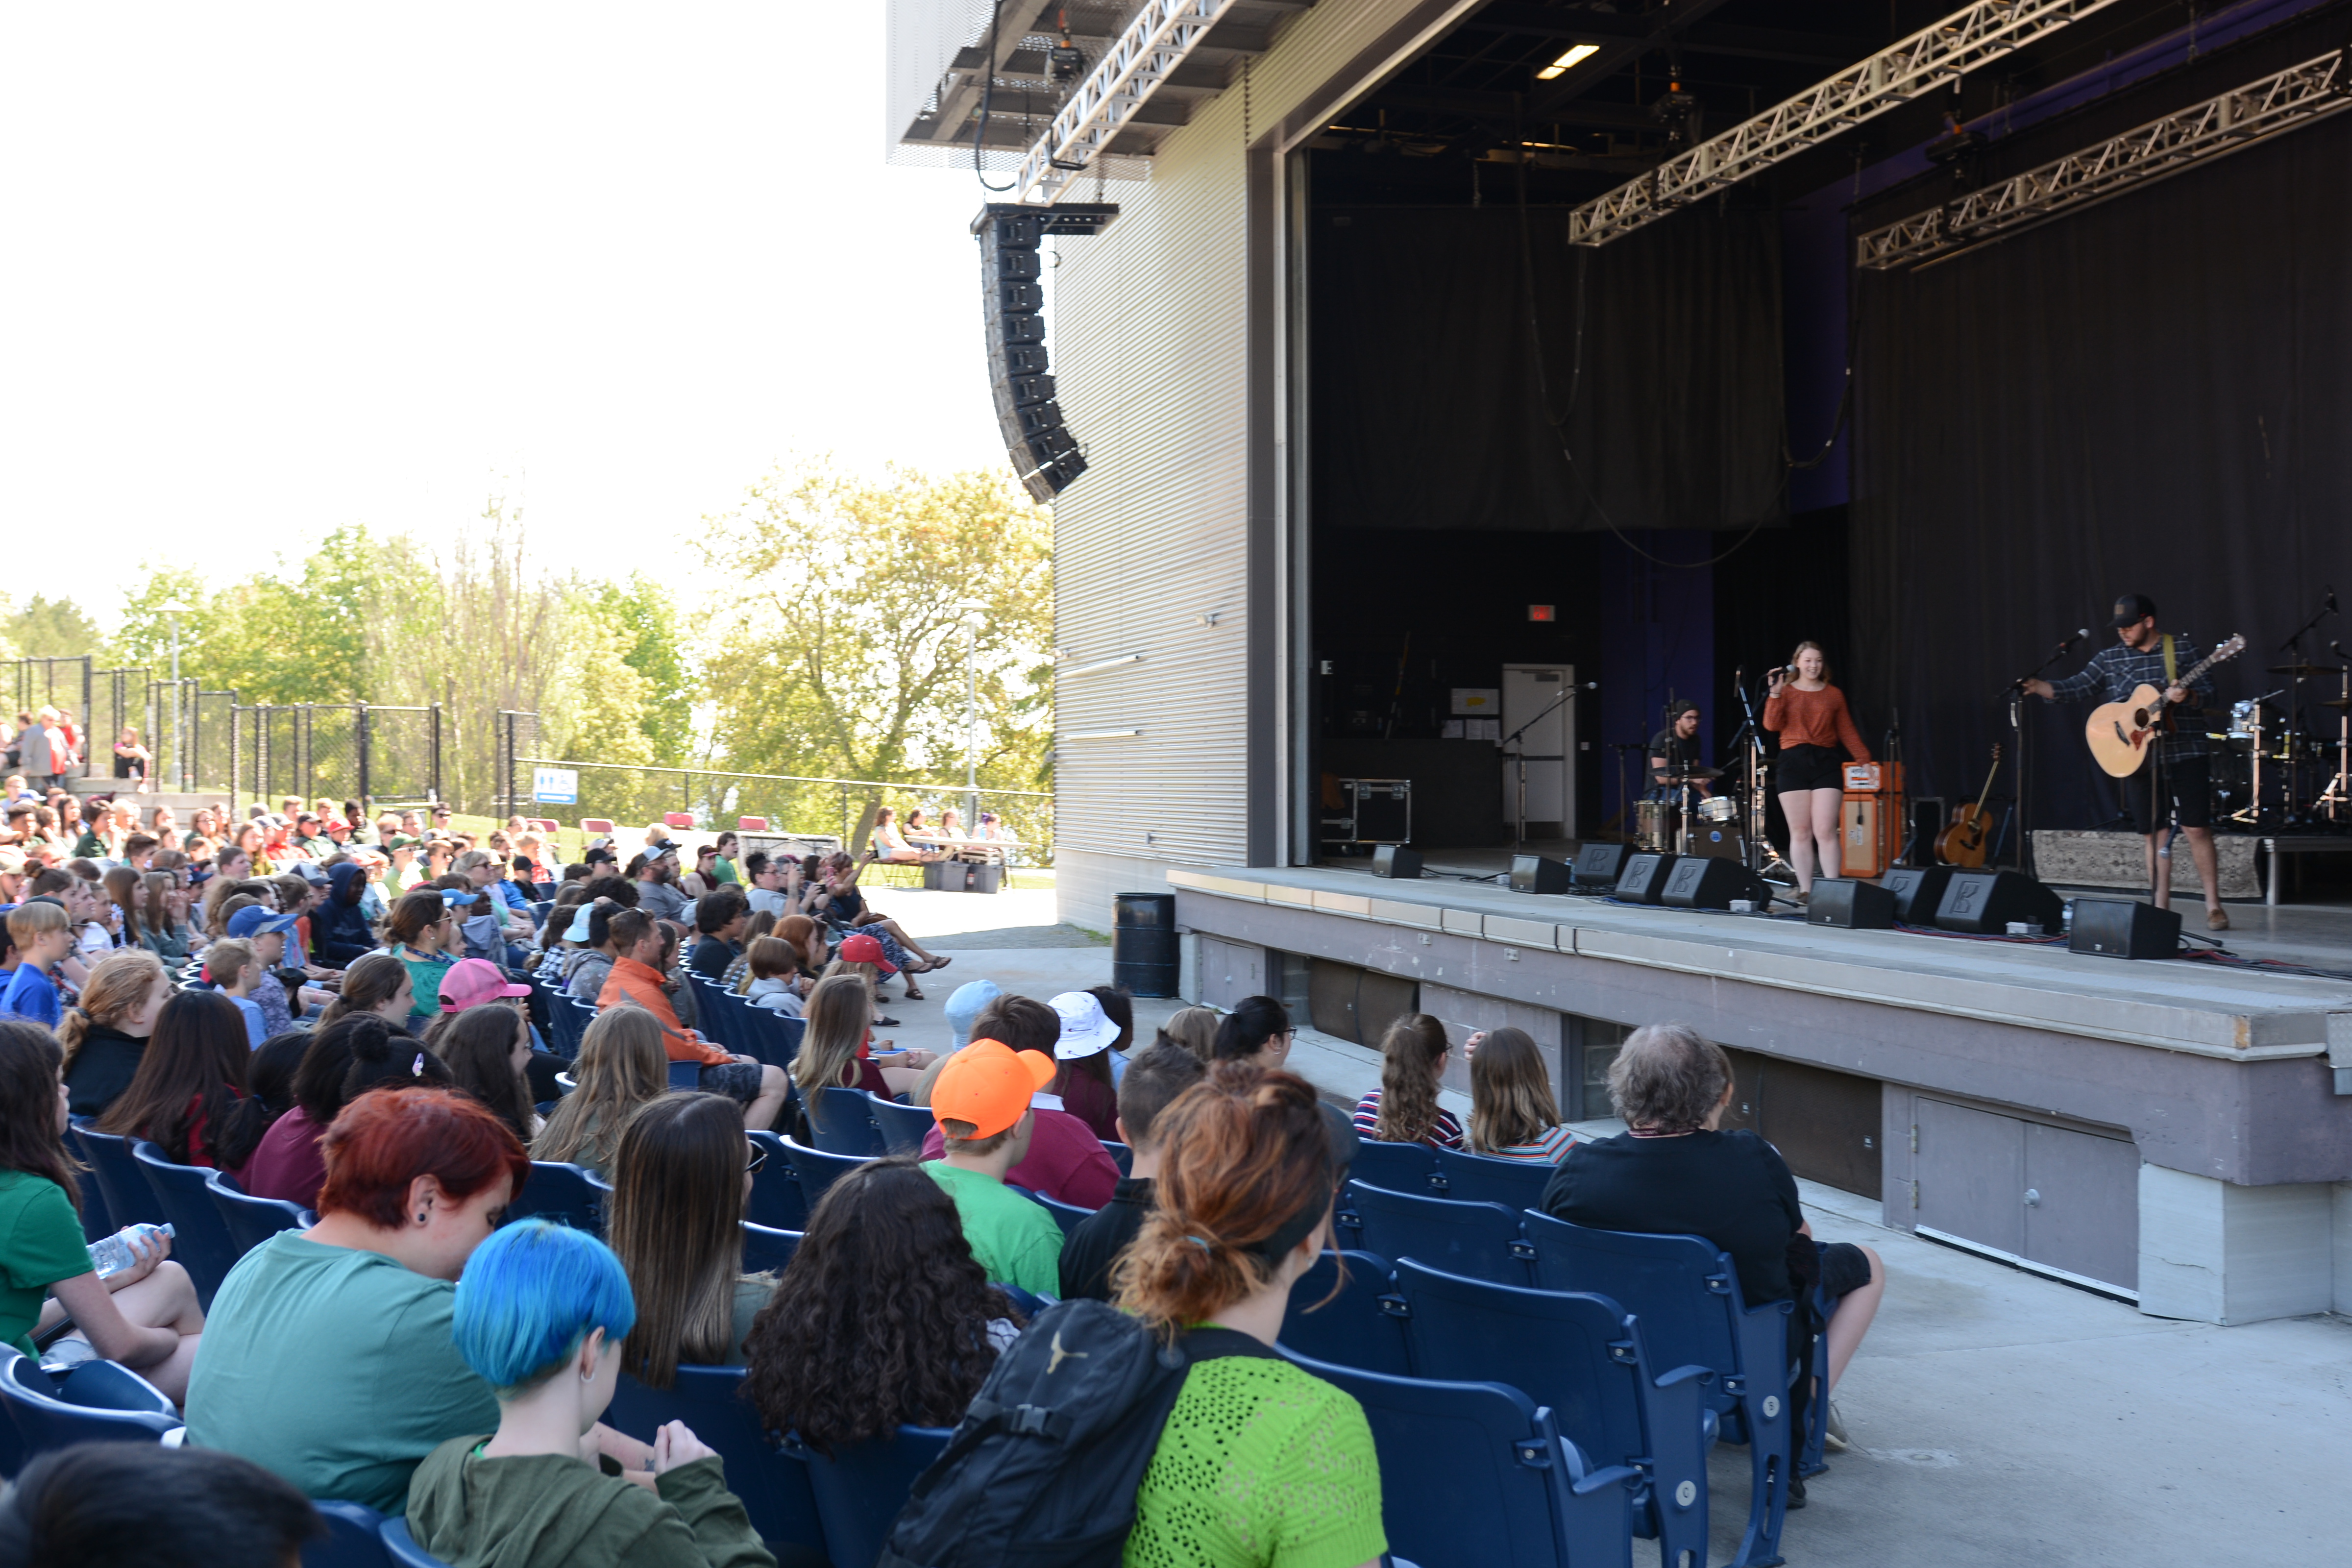 A large audience watches a girl singing onstage.